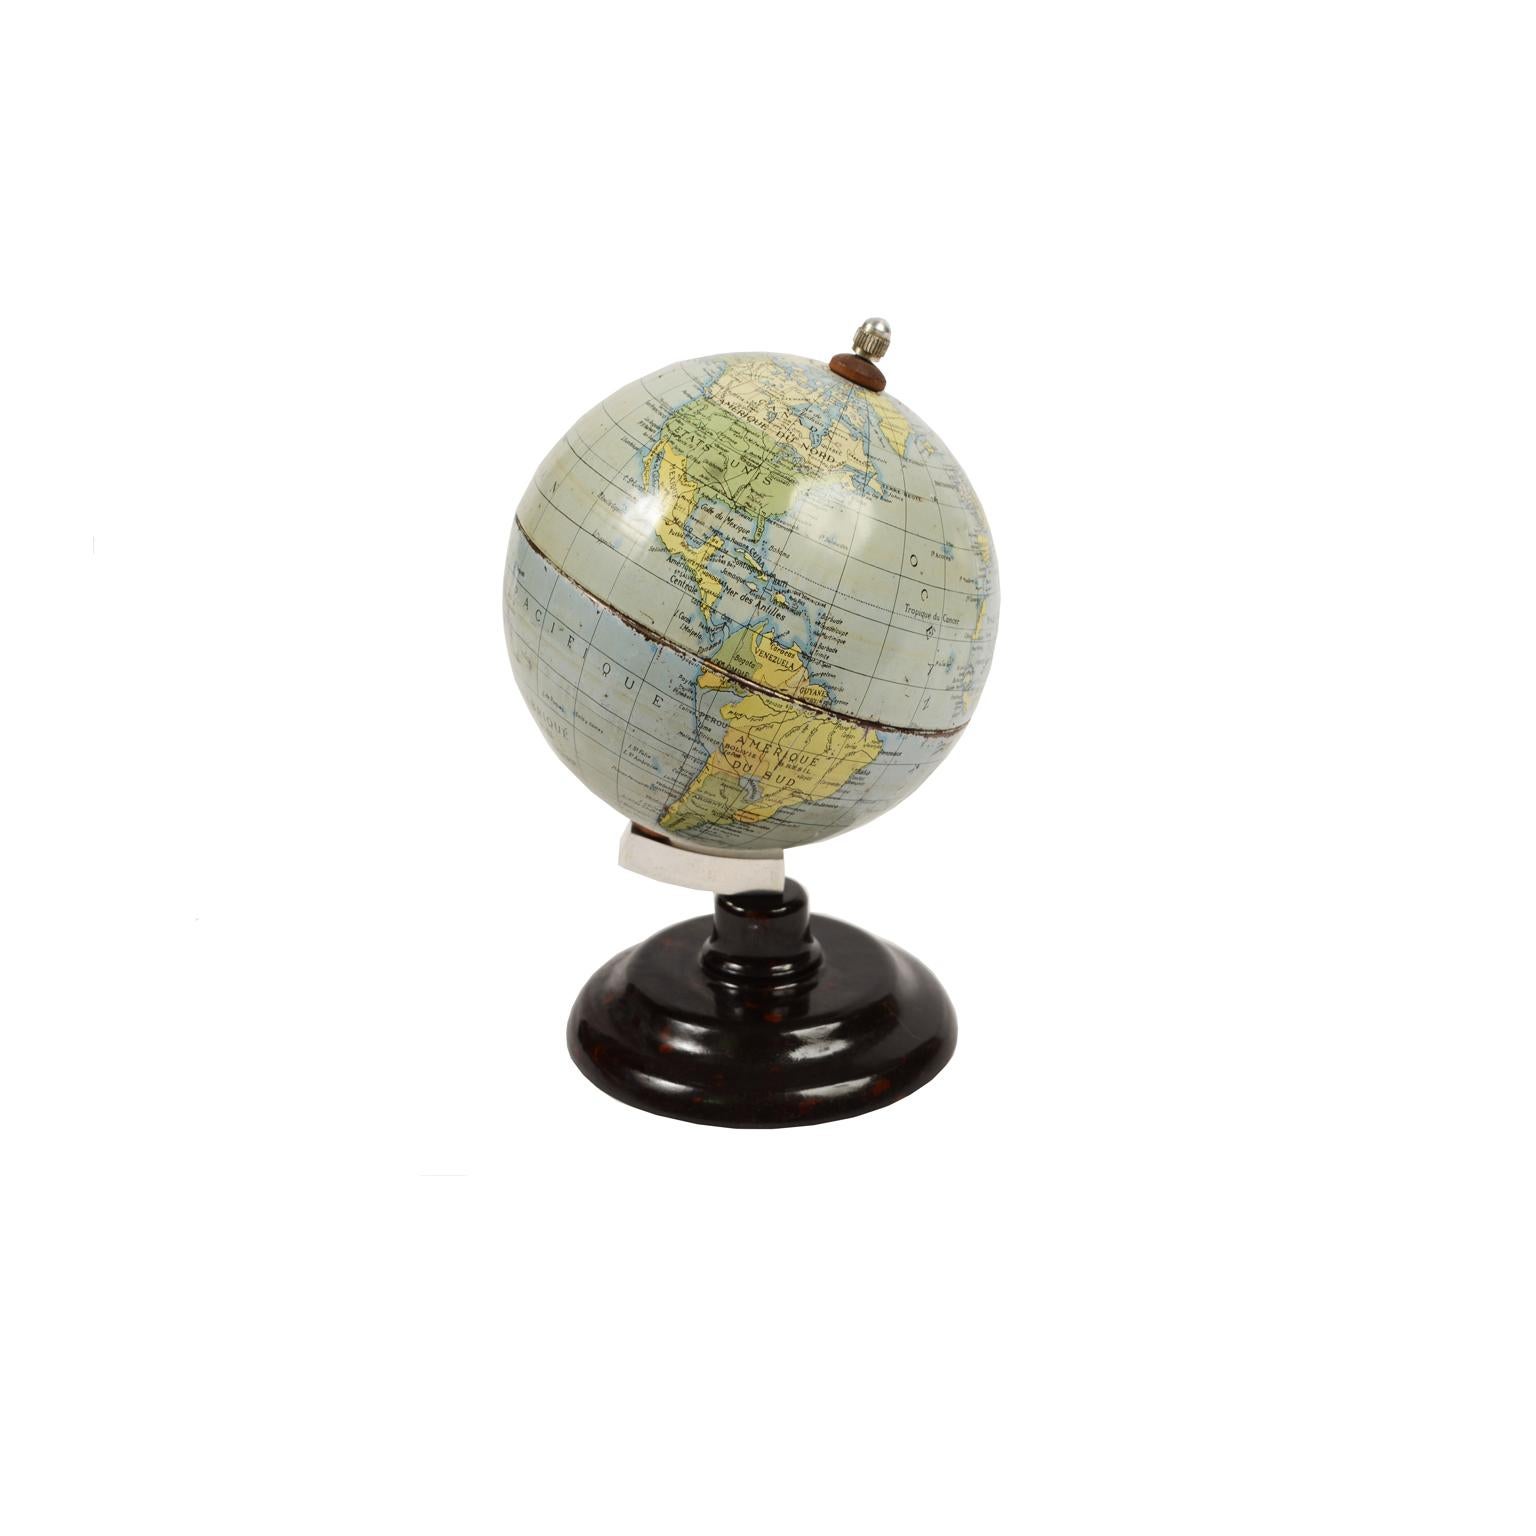 Small terrestrial globe made of lithographed tin and ebonite base made in England for the French market in the early 1950s. Very good condition. Measures: Height 18 cm - 4.33 inches, sphere diameter 11 cm - 7 inches.
  